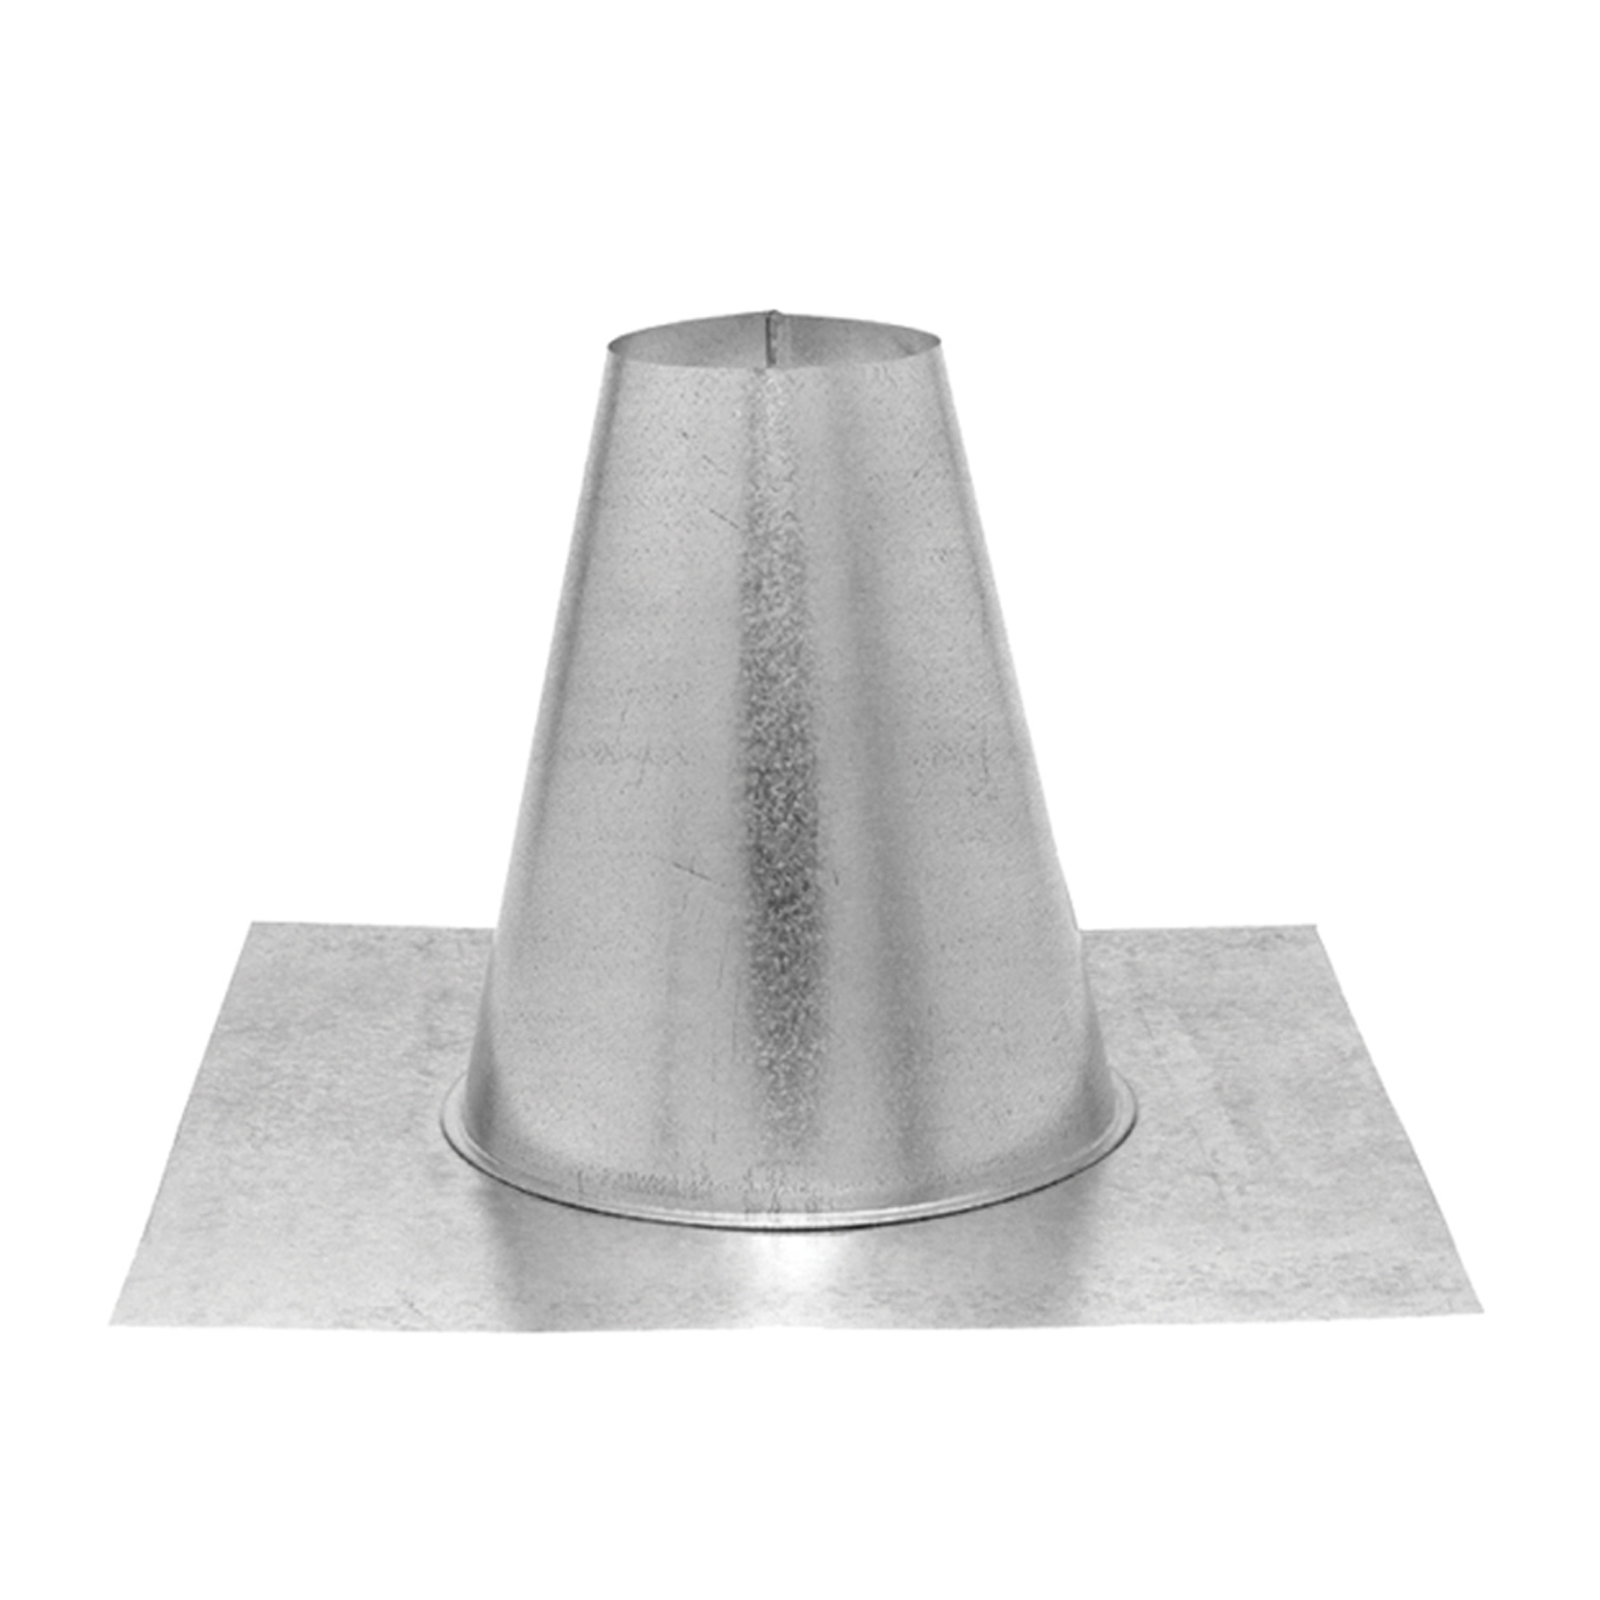 DuraVent Pellet Vent Pro Tall Cone Roof Flashing | 4PVP-FF